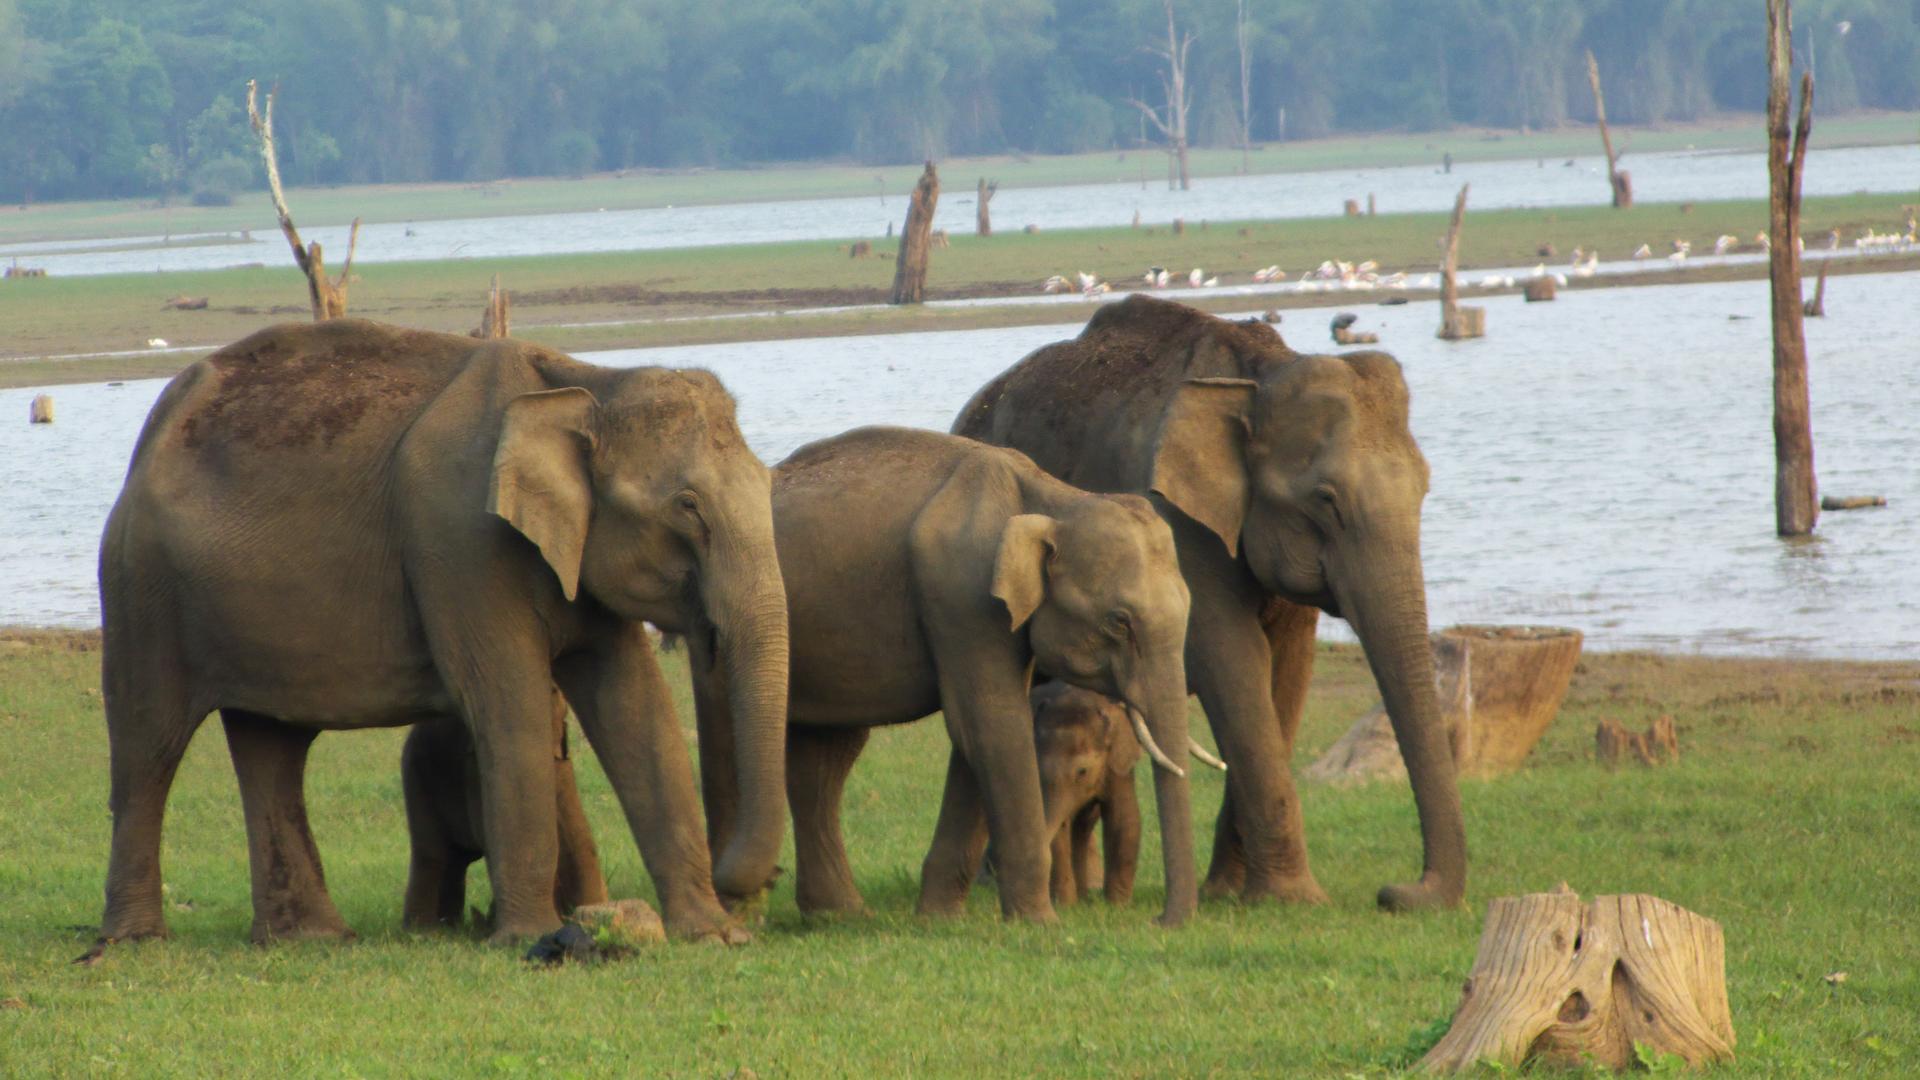 An elephant herd by Kabini River in Southern India.